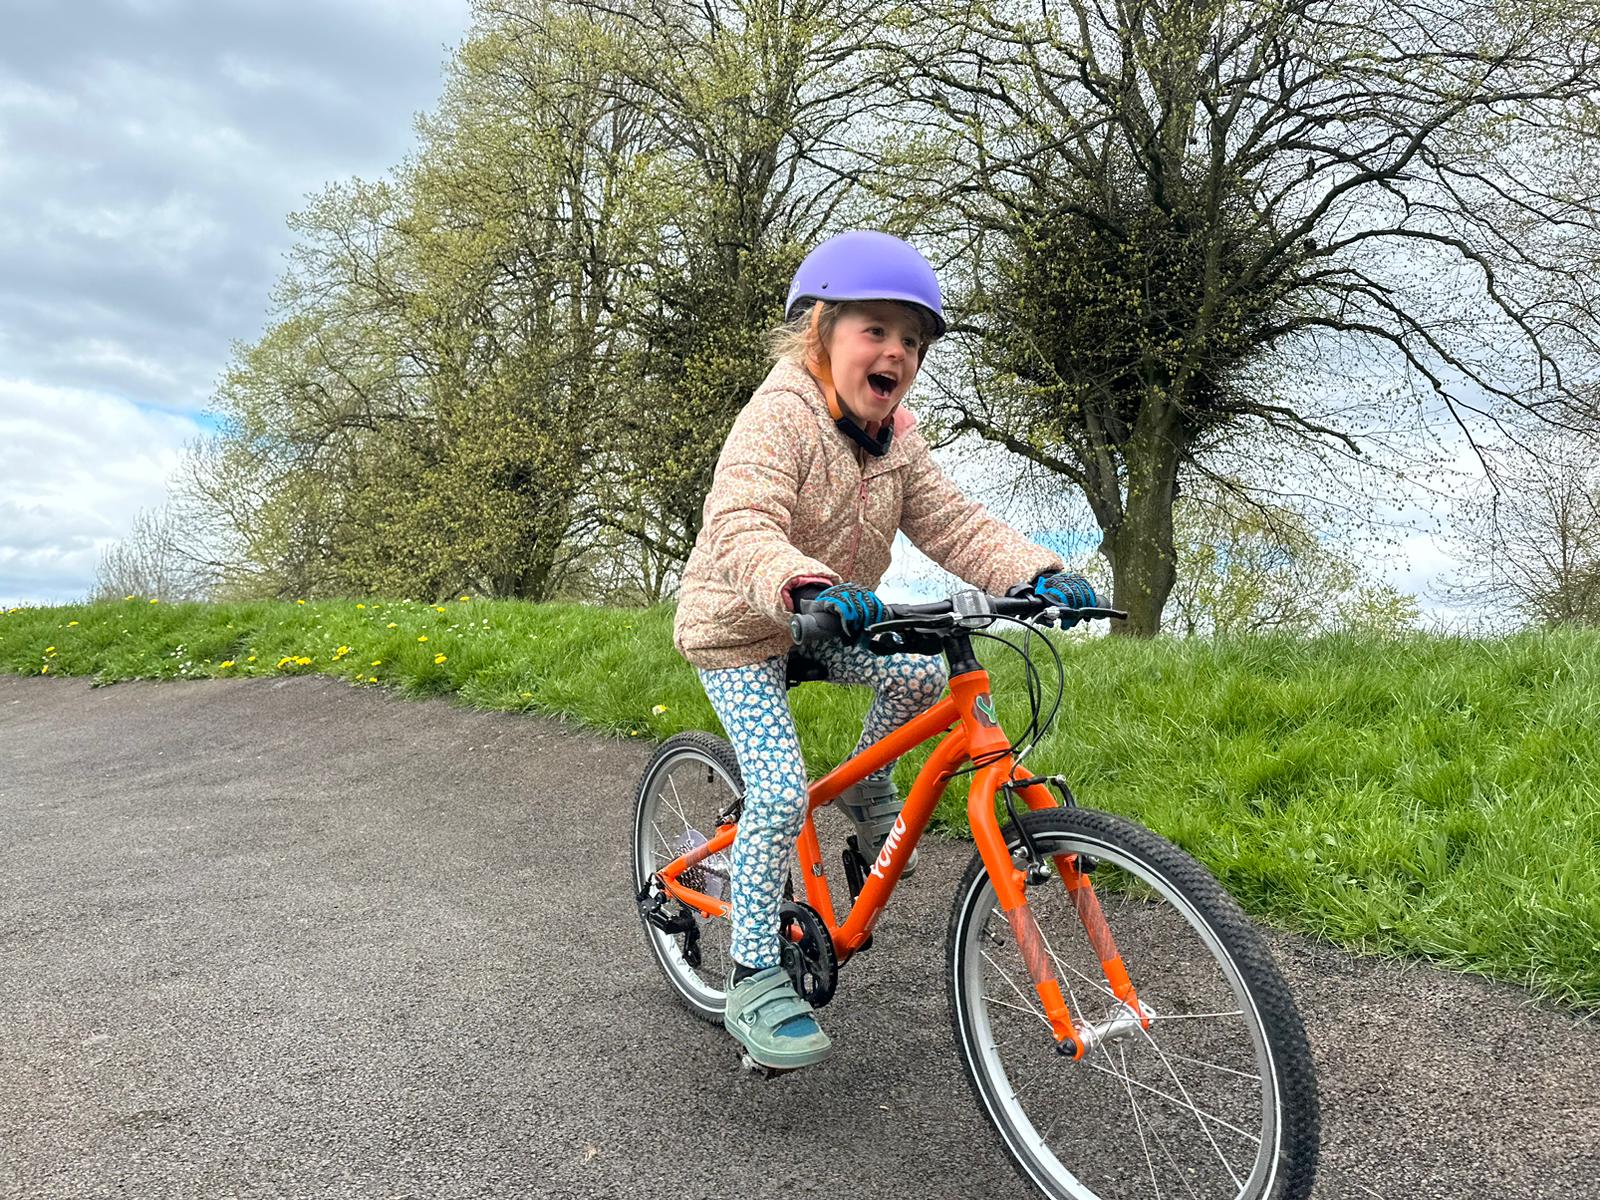 A 6 year old girl in a pink coat and purple helmet riding a orange yomo 20 bike on a pump track with a massive grin on her face